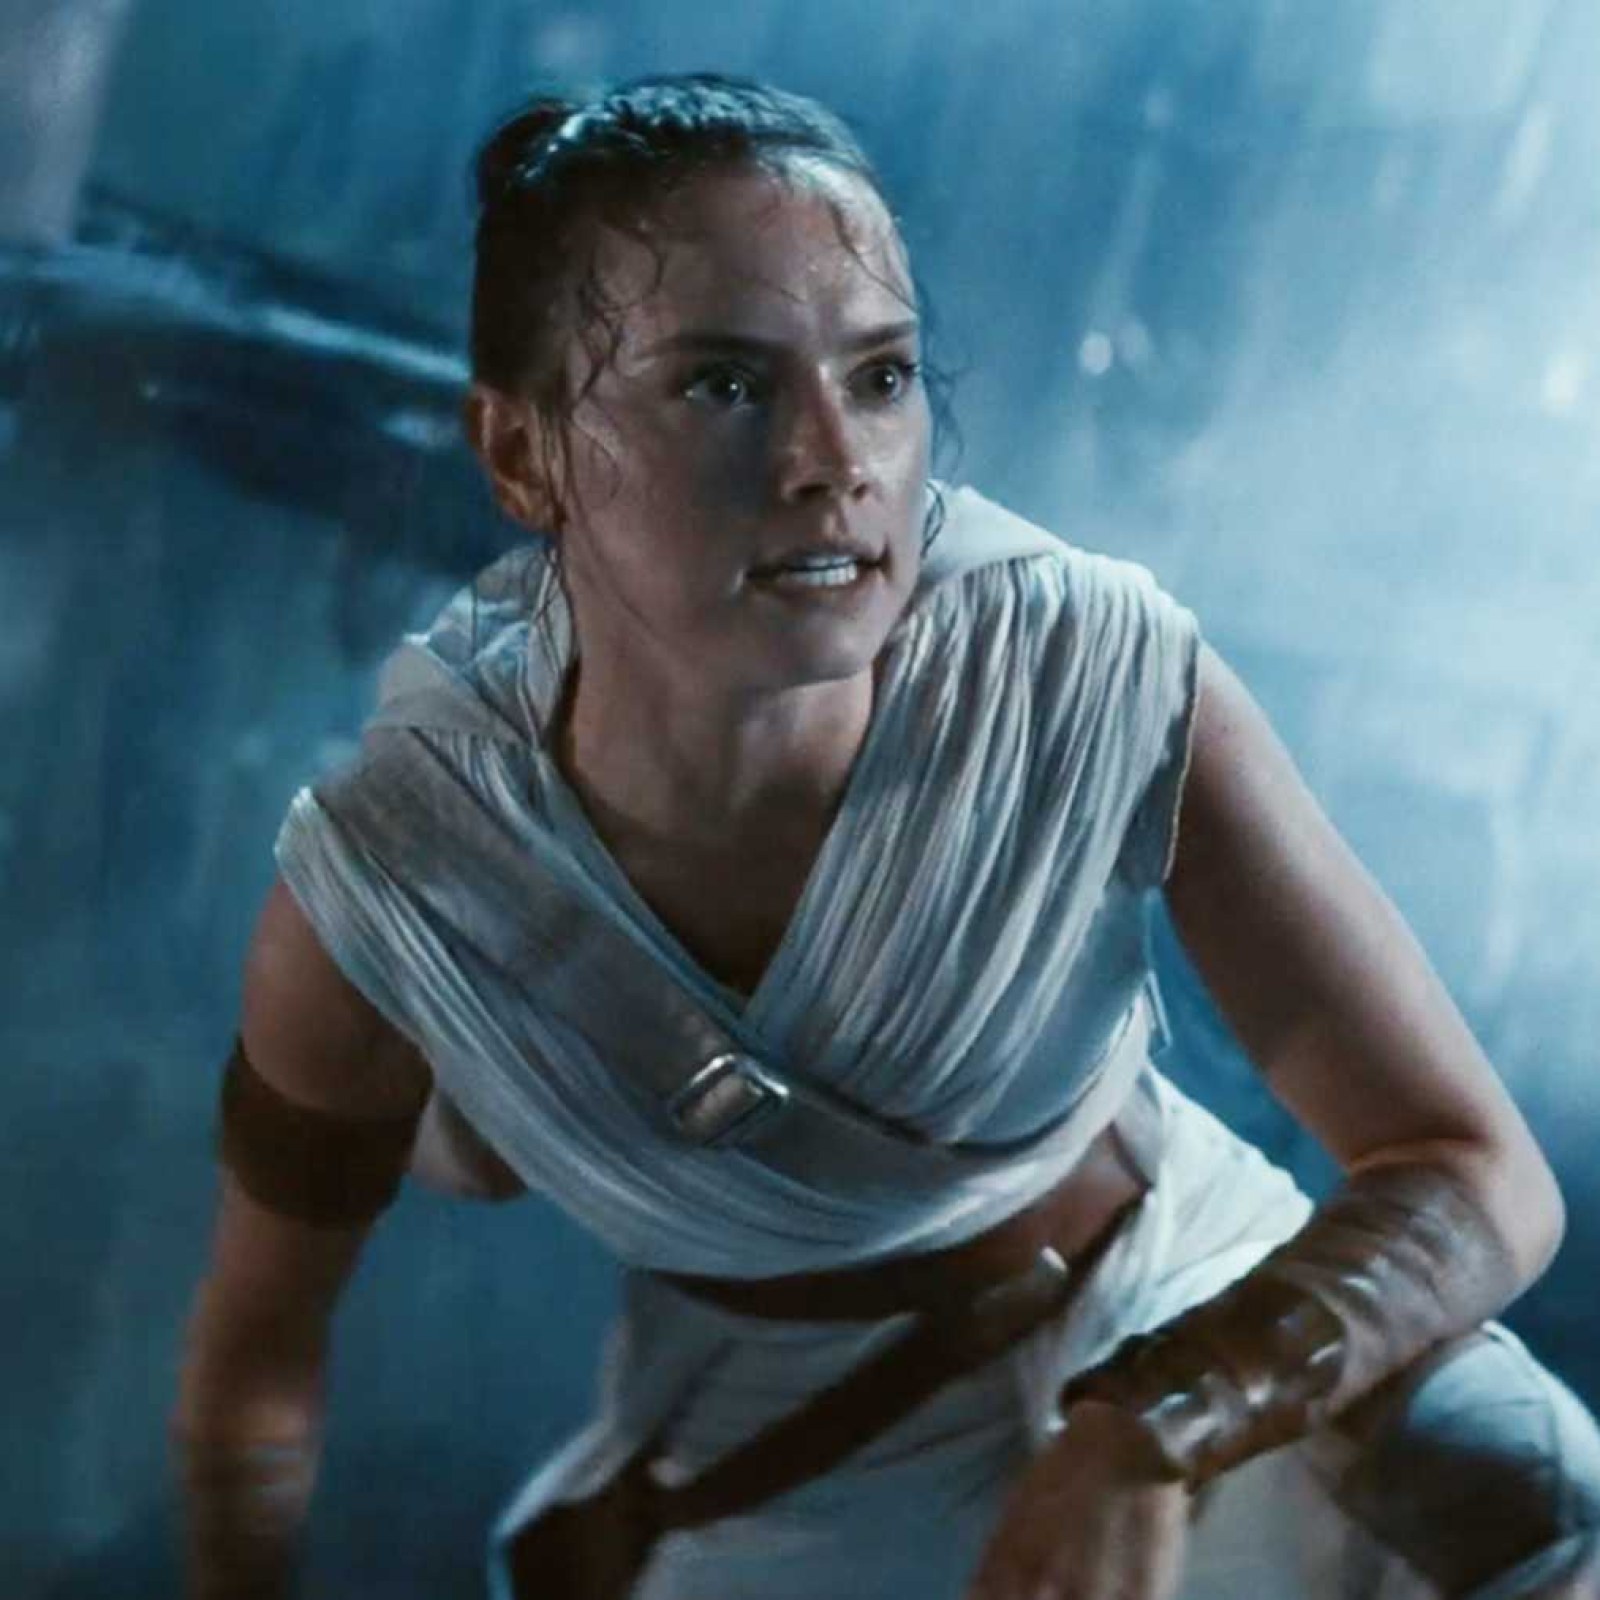 Rise Of Skywalker' Is One Of The Worst-Reviewed 'Star Wars